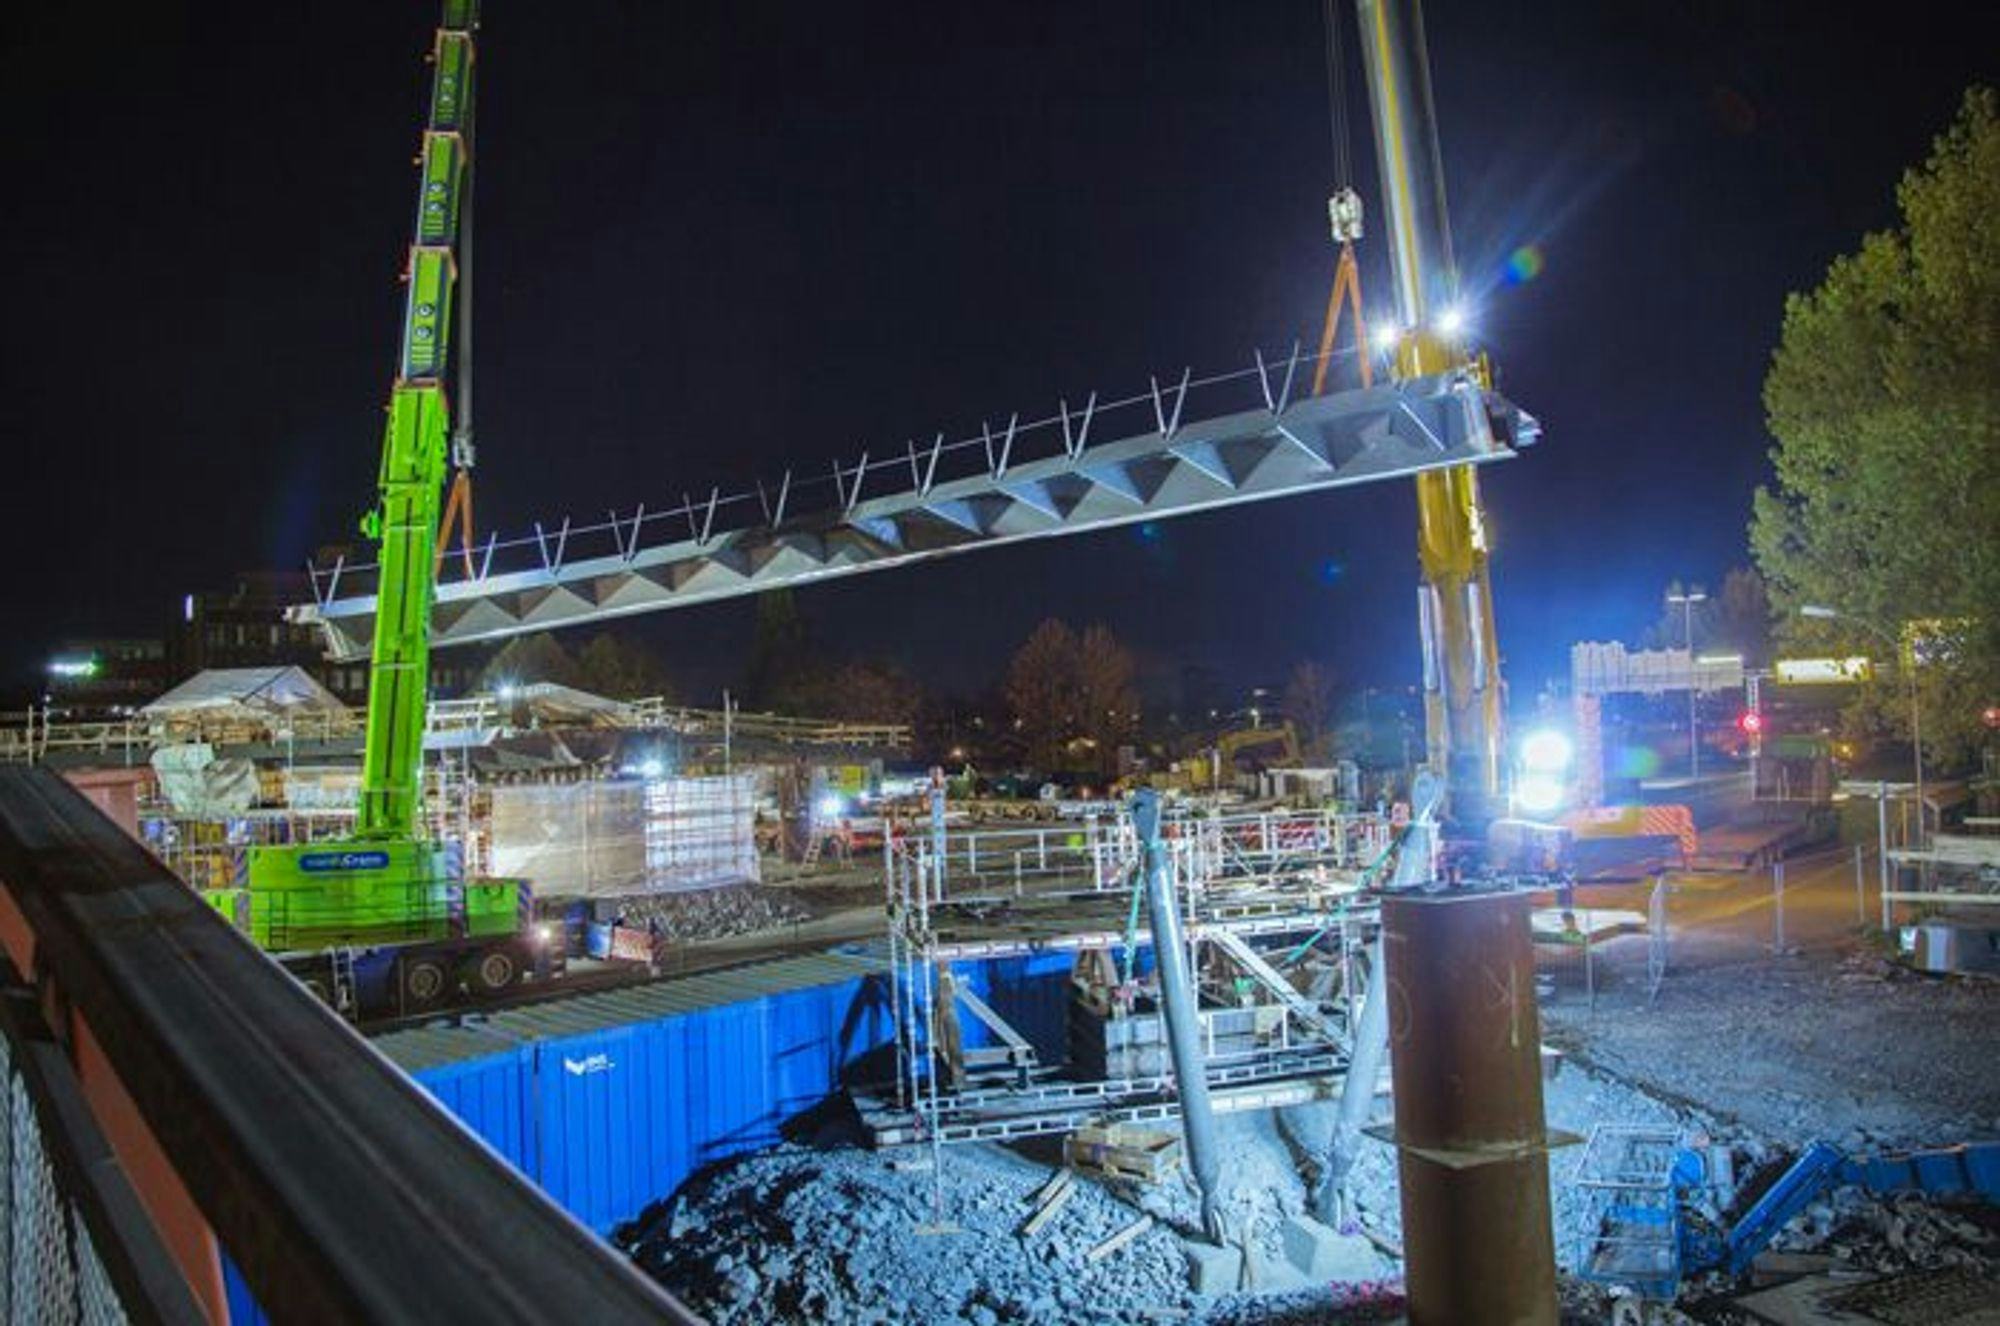 A construction site at night with a large crane lifting a section of a bridge